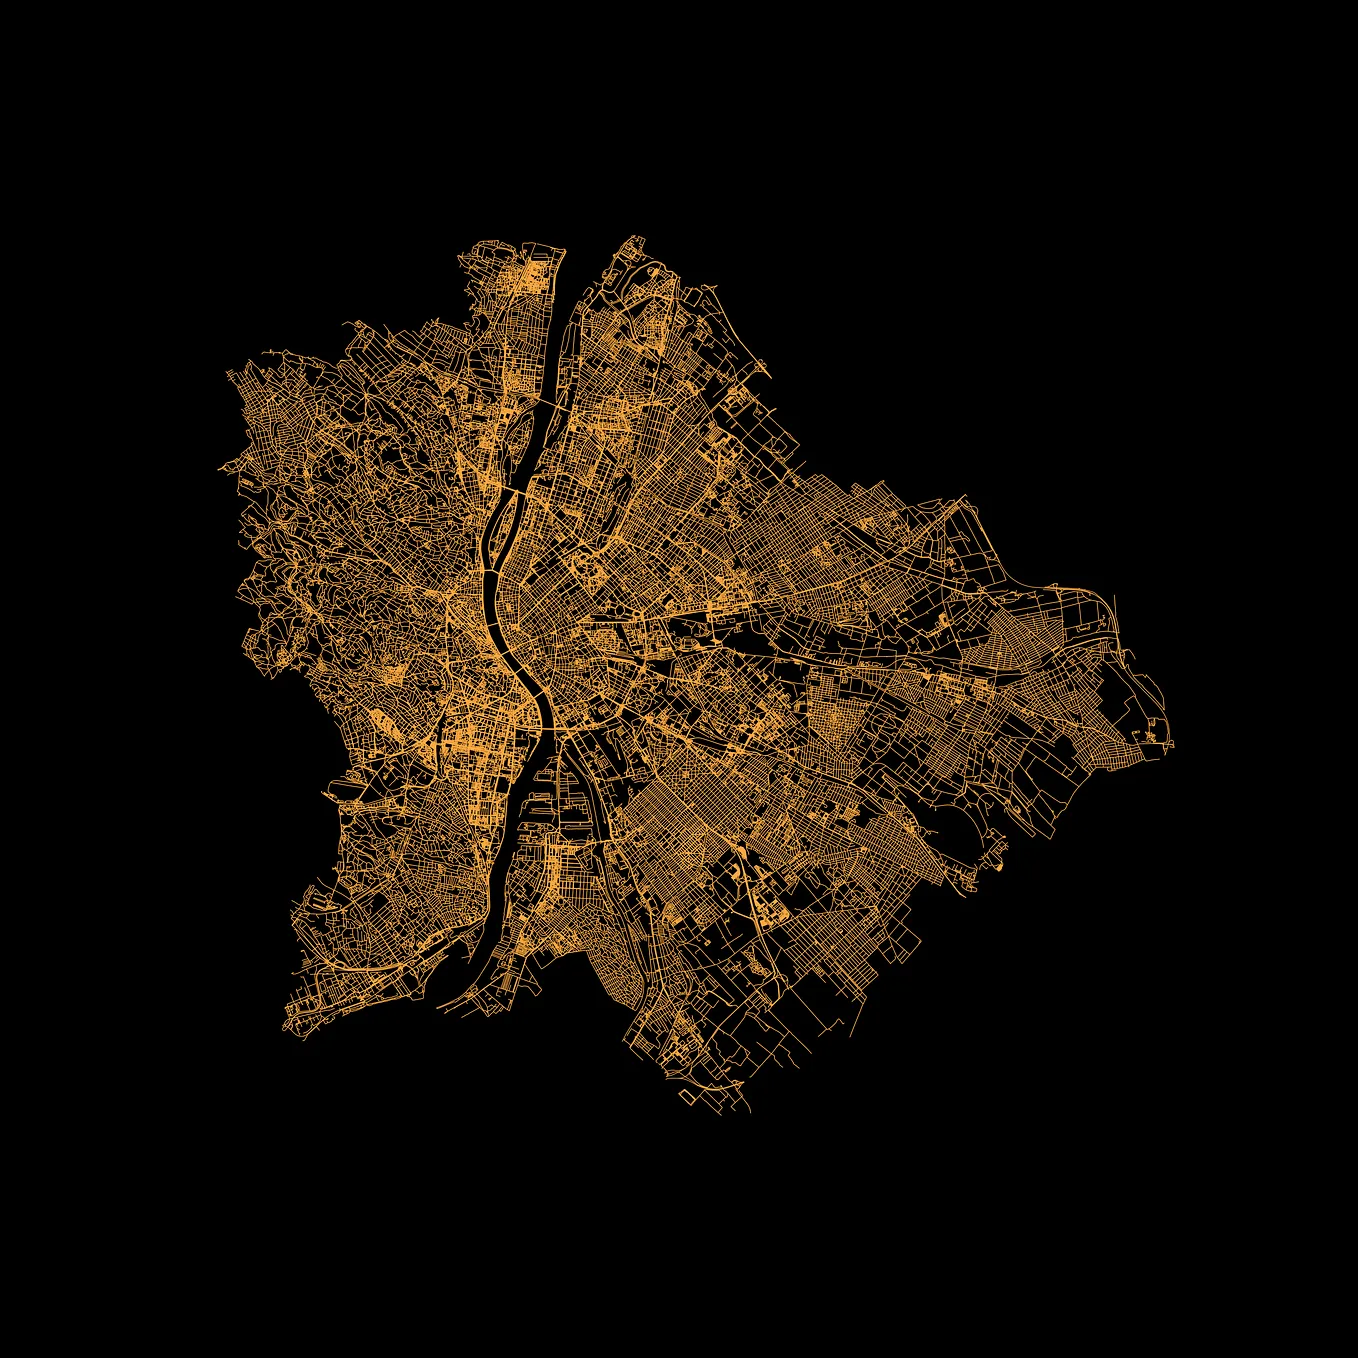 Visualizing Road Networks